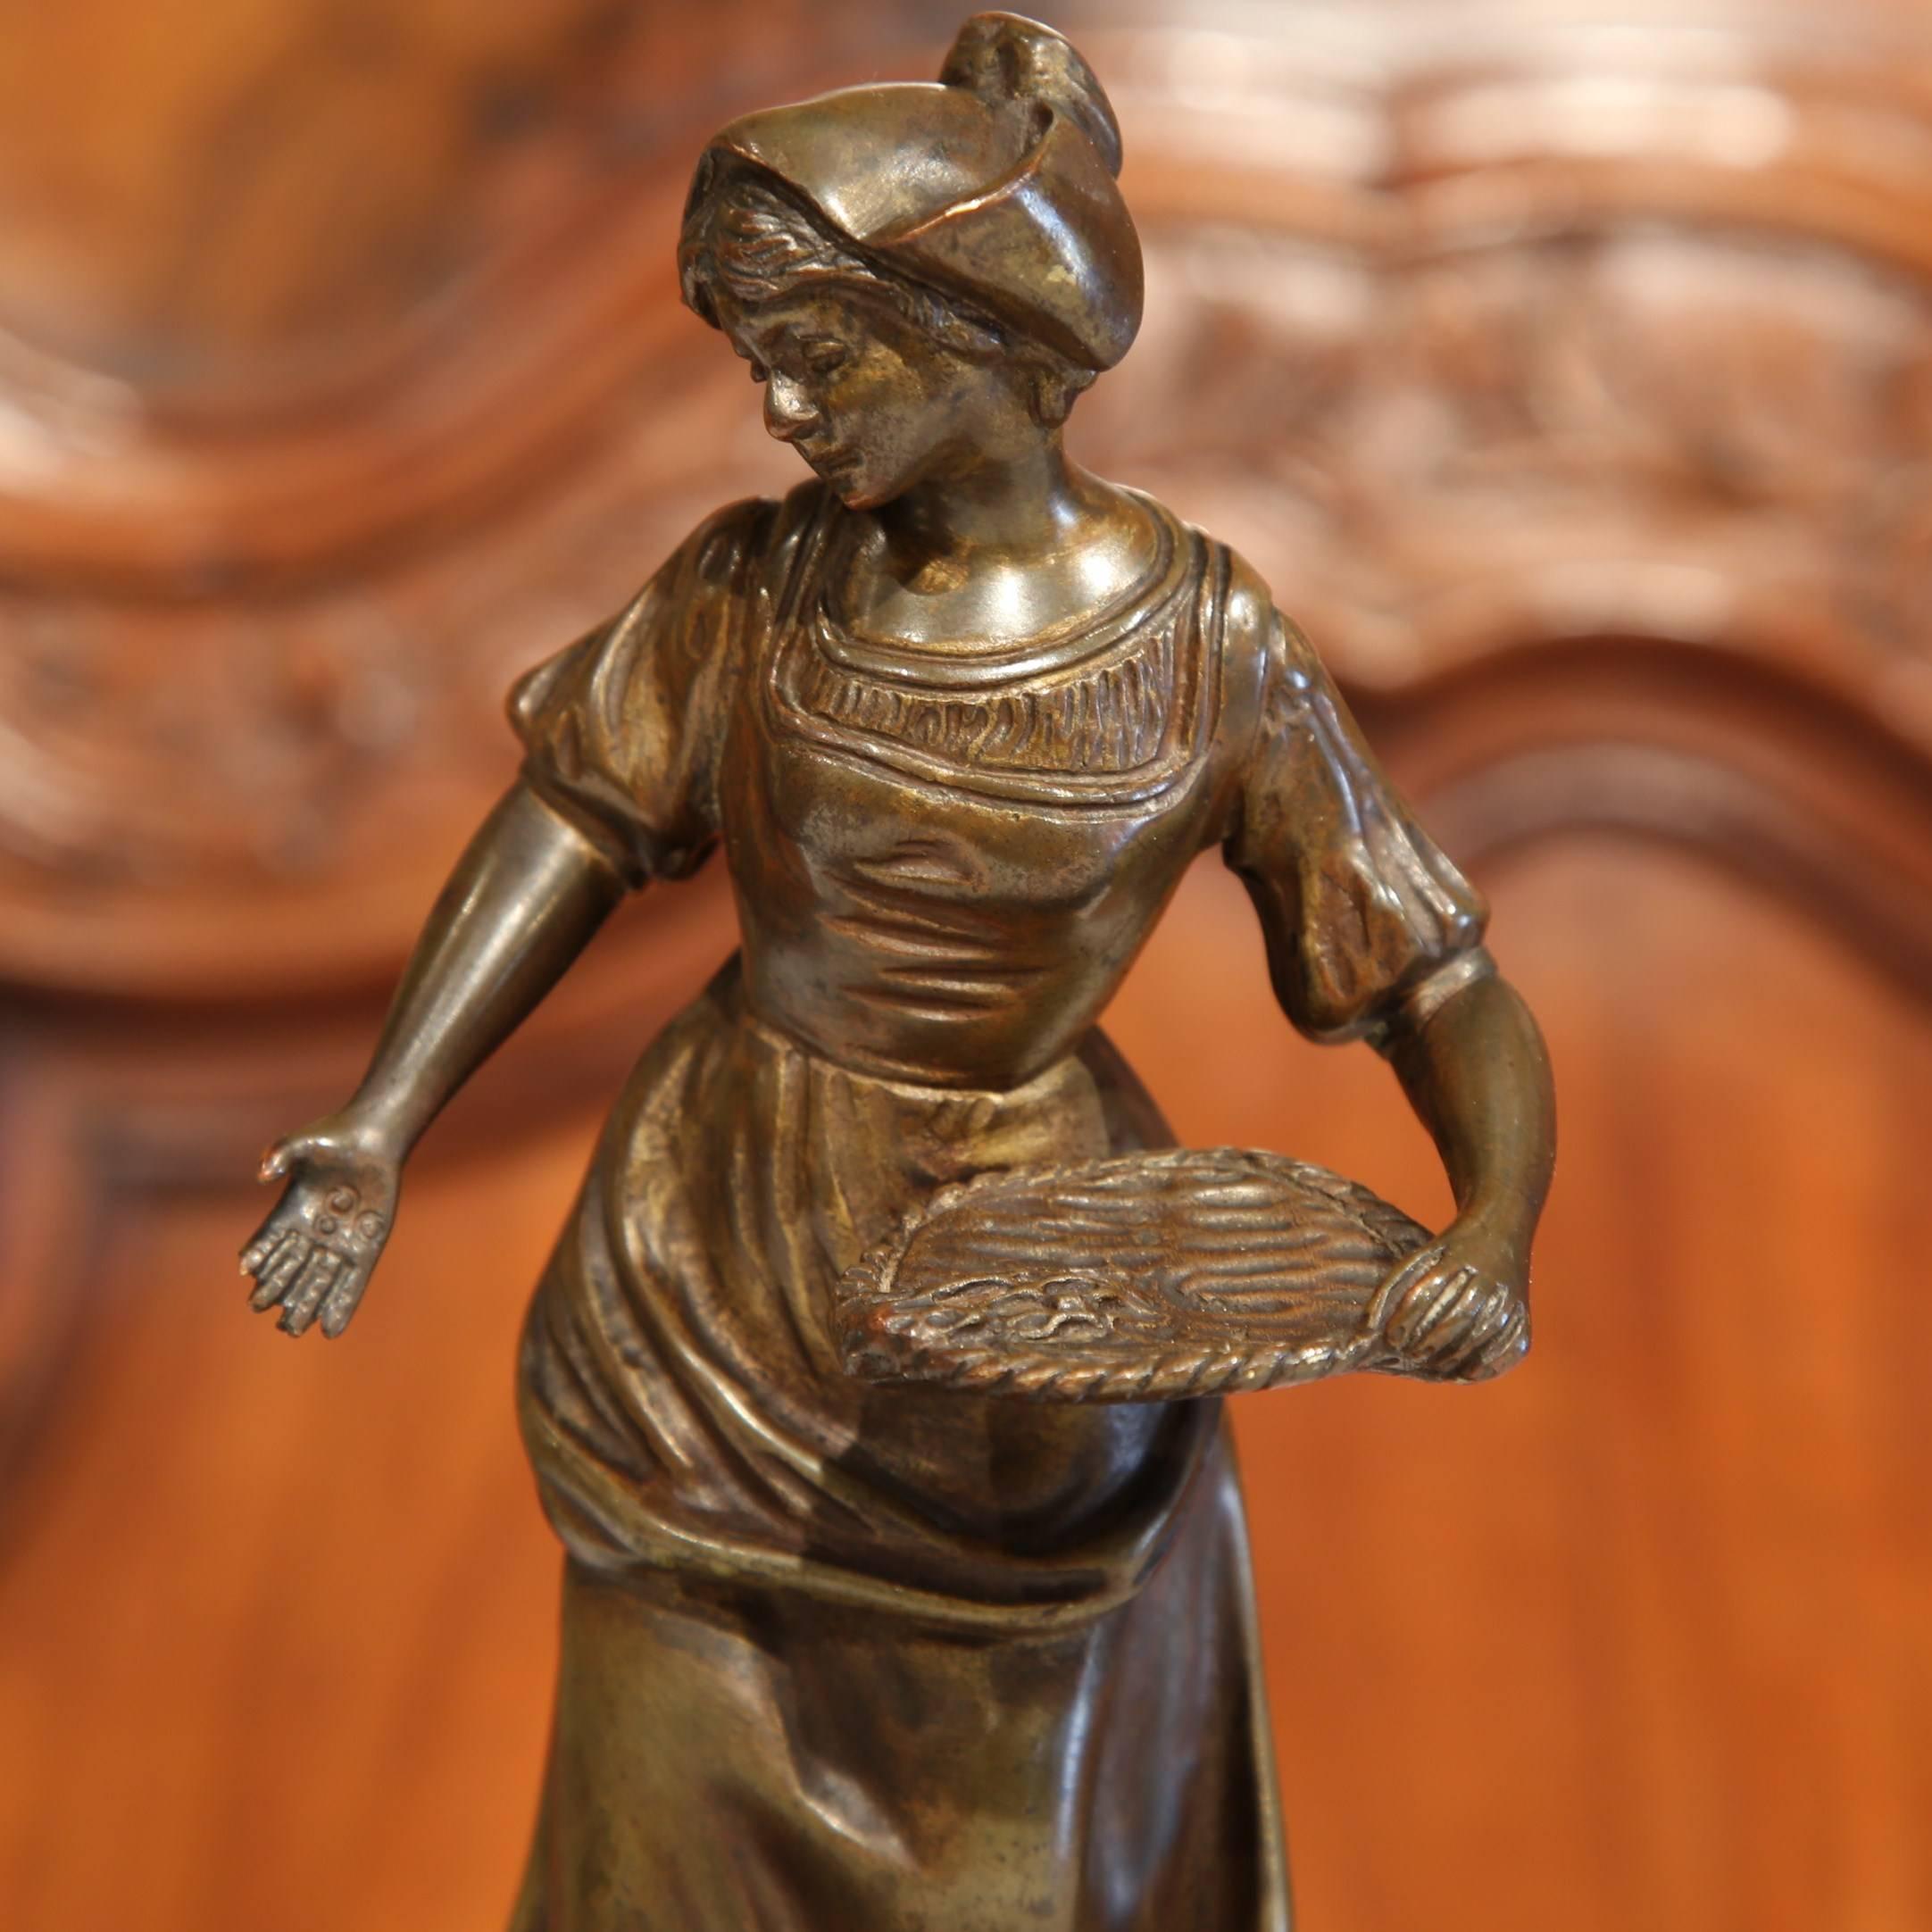 This small bronze sculpture from France was sculpted, circa 1880 and depicts a bucolic scene: A woman feeding a chicken in Provencal attire. The sculpture, mounted on a red marble base, is signed on the back by French sculptor Georges Omerth